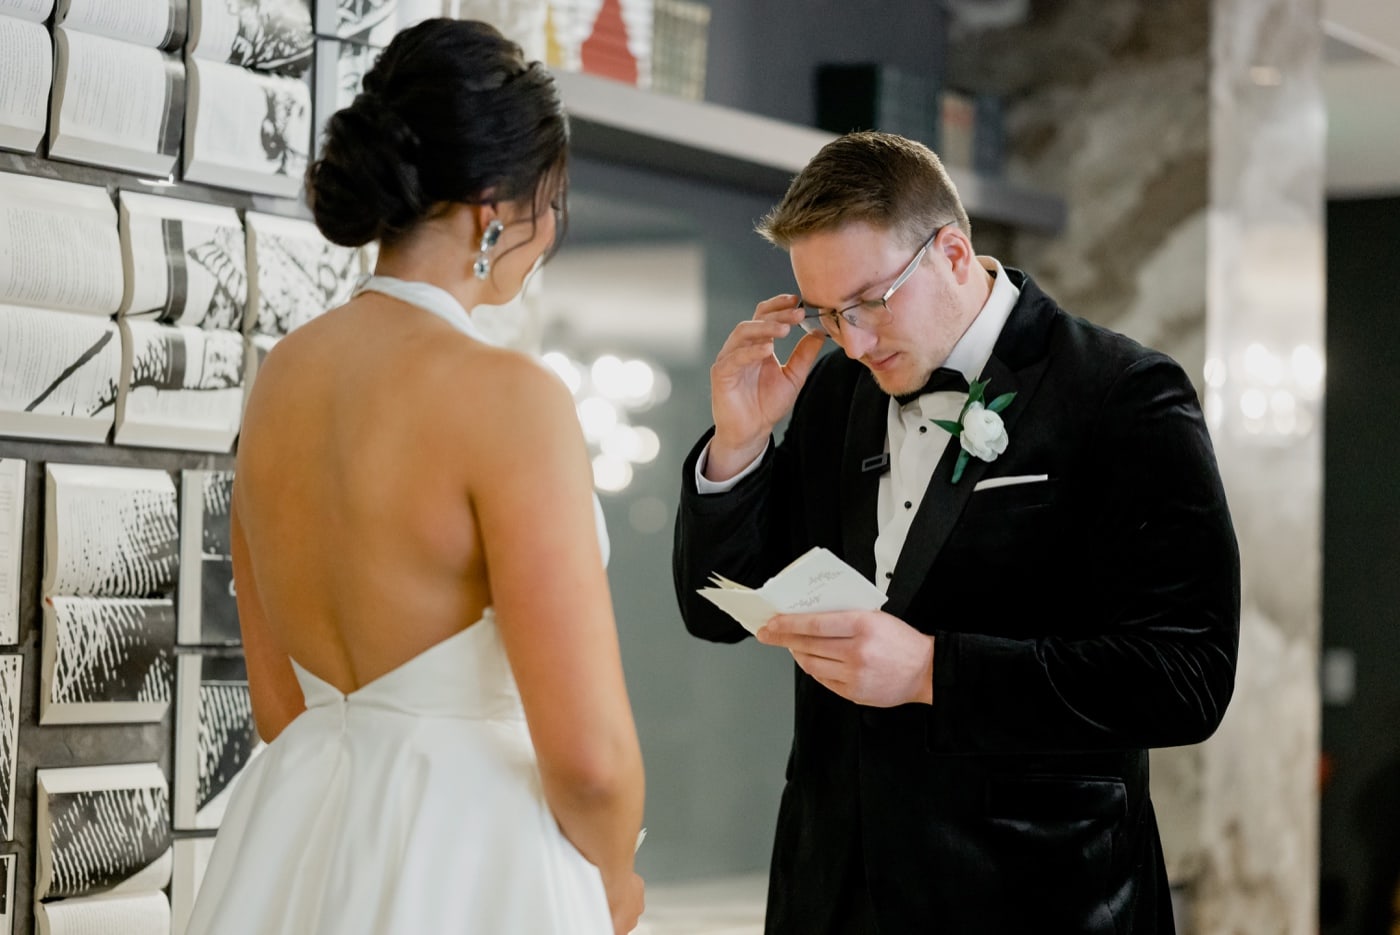 vows at hotel fort des moines wedding